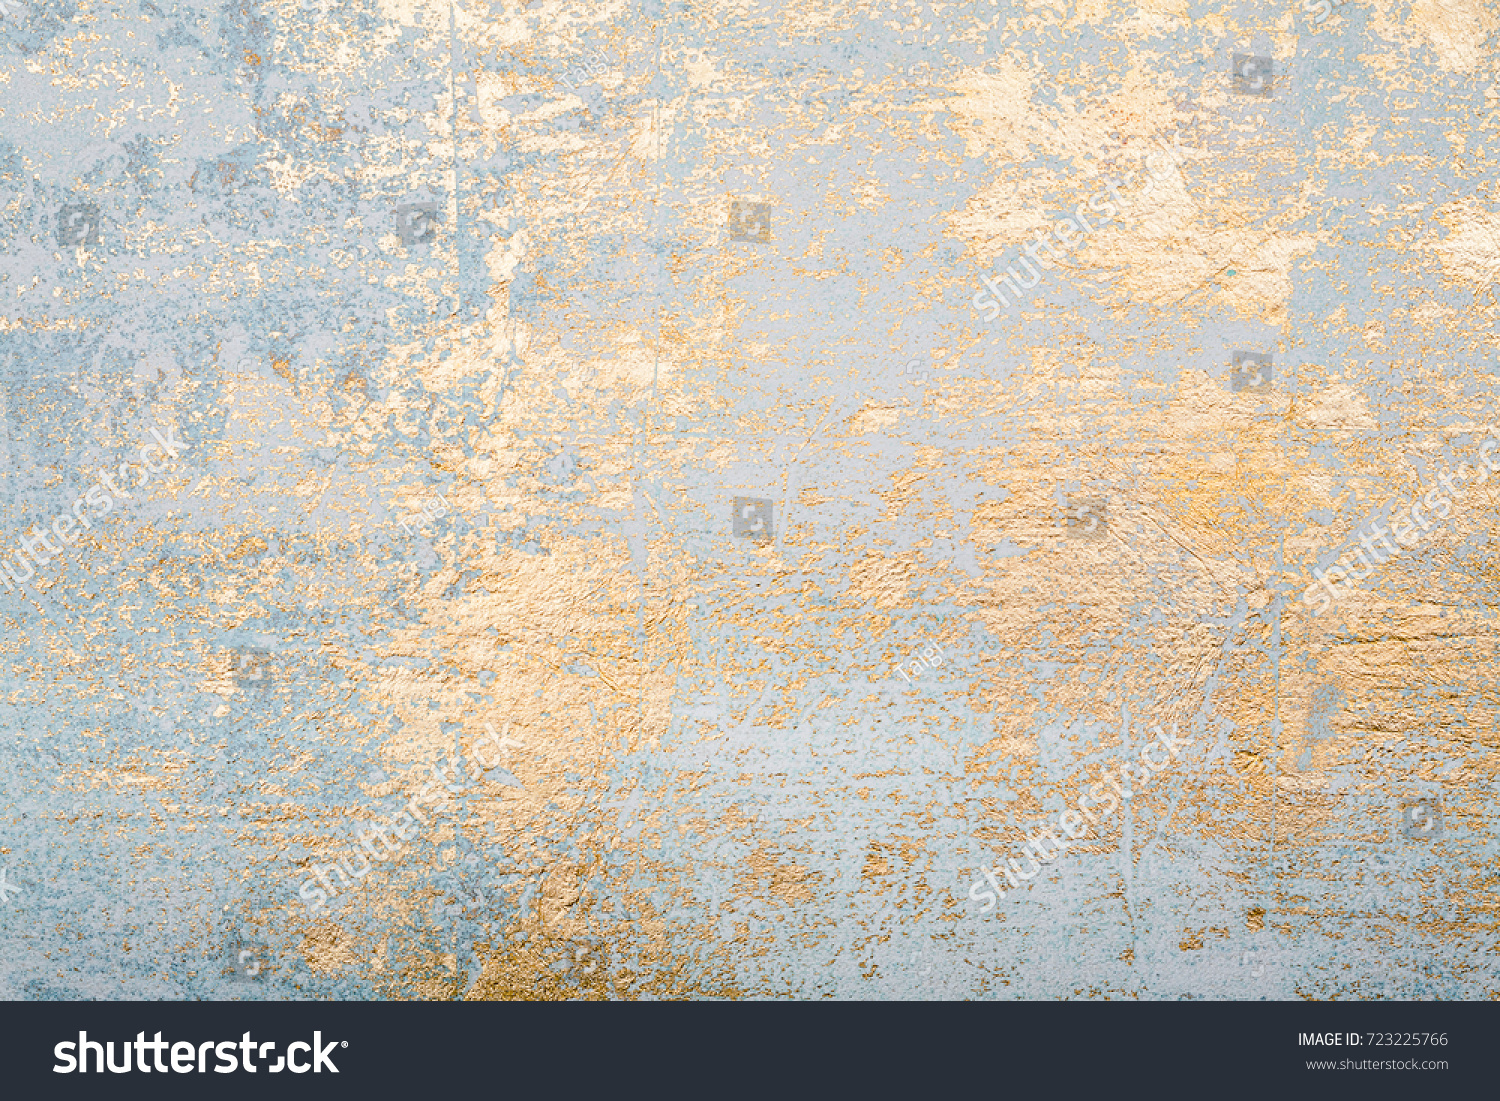 White and golden messy wall stucco texture background. Decorative wall paint. #723225766